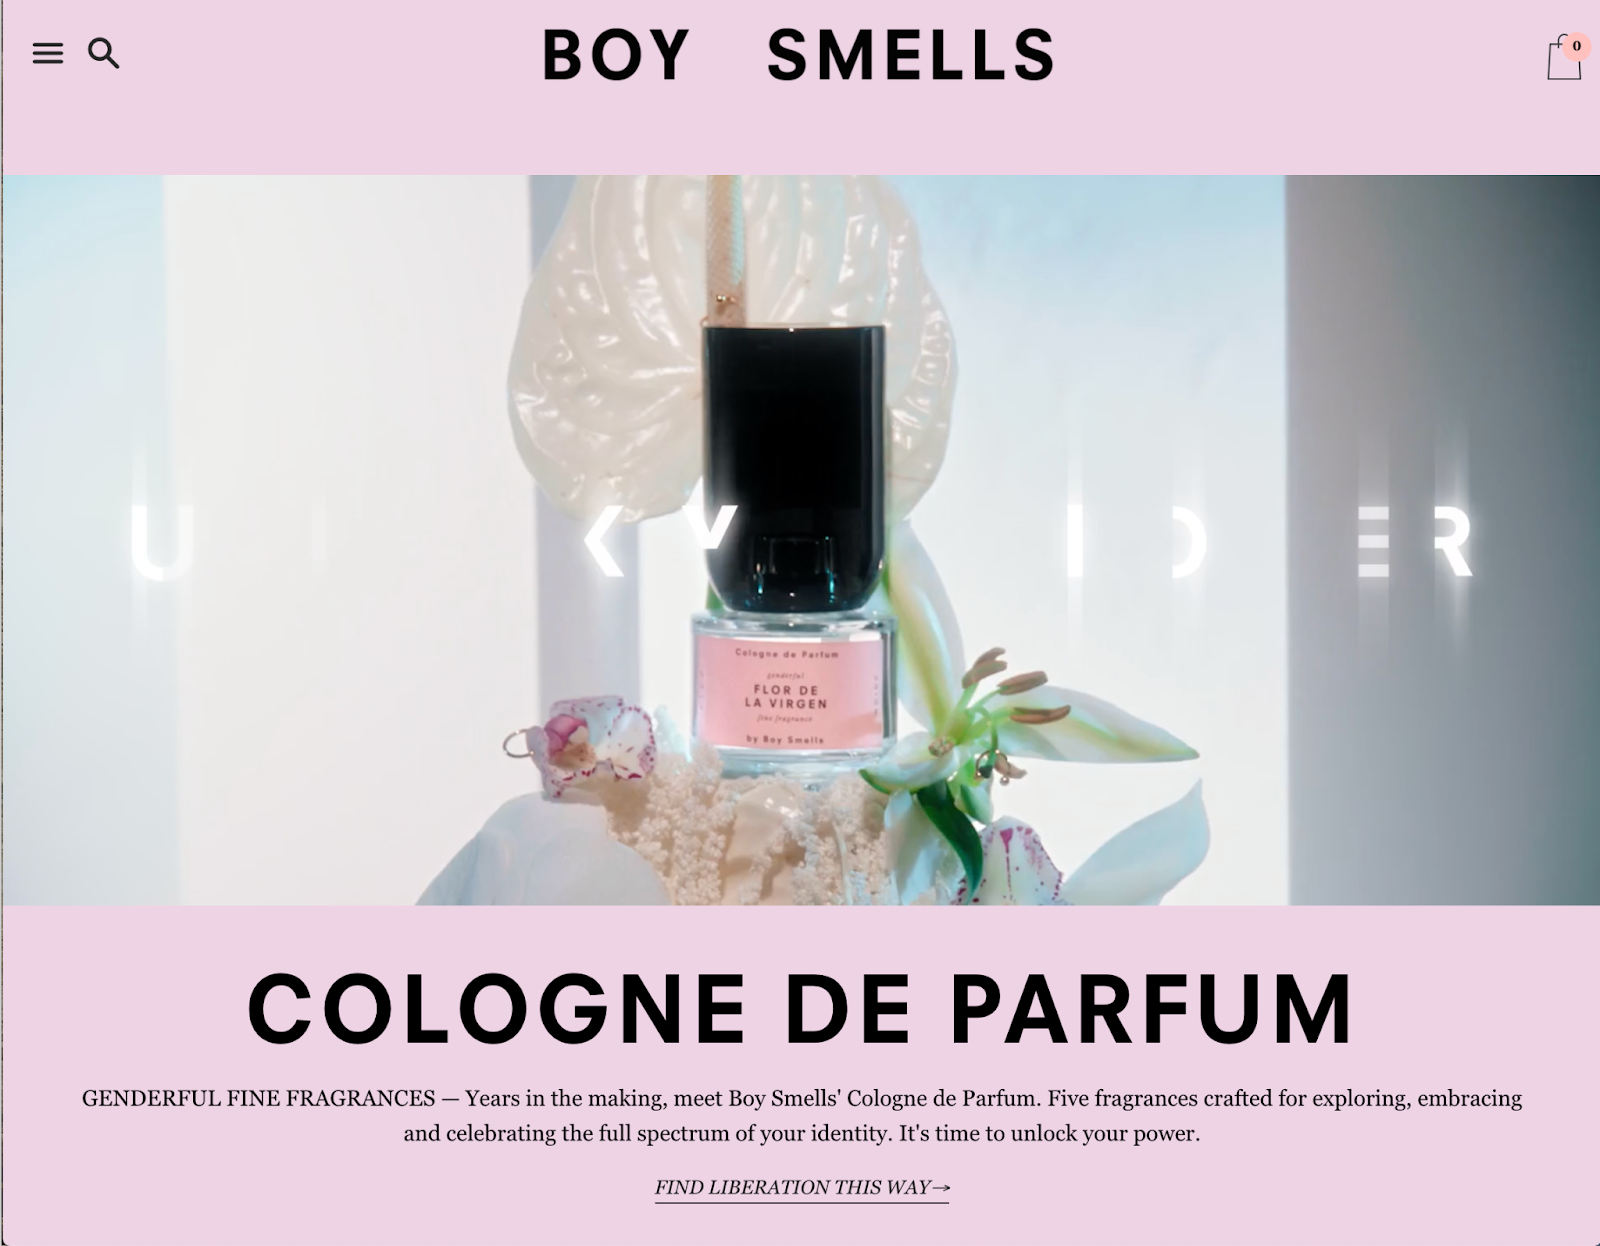 Candle business Boy Smells' visual brand